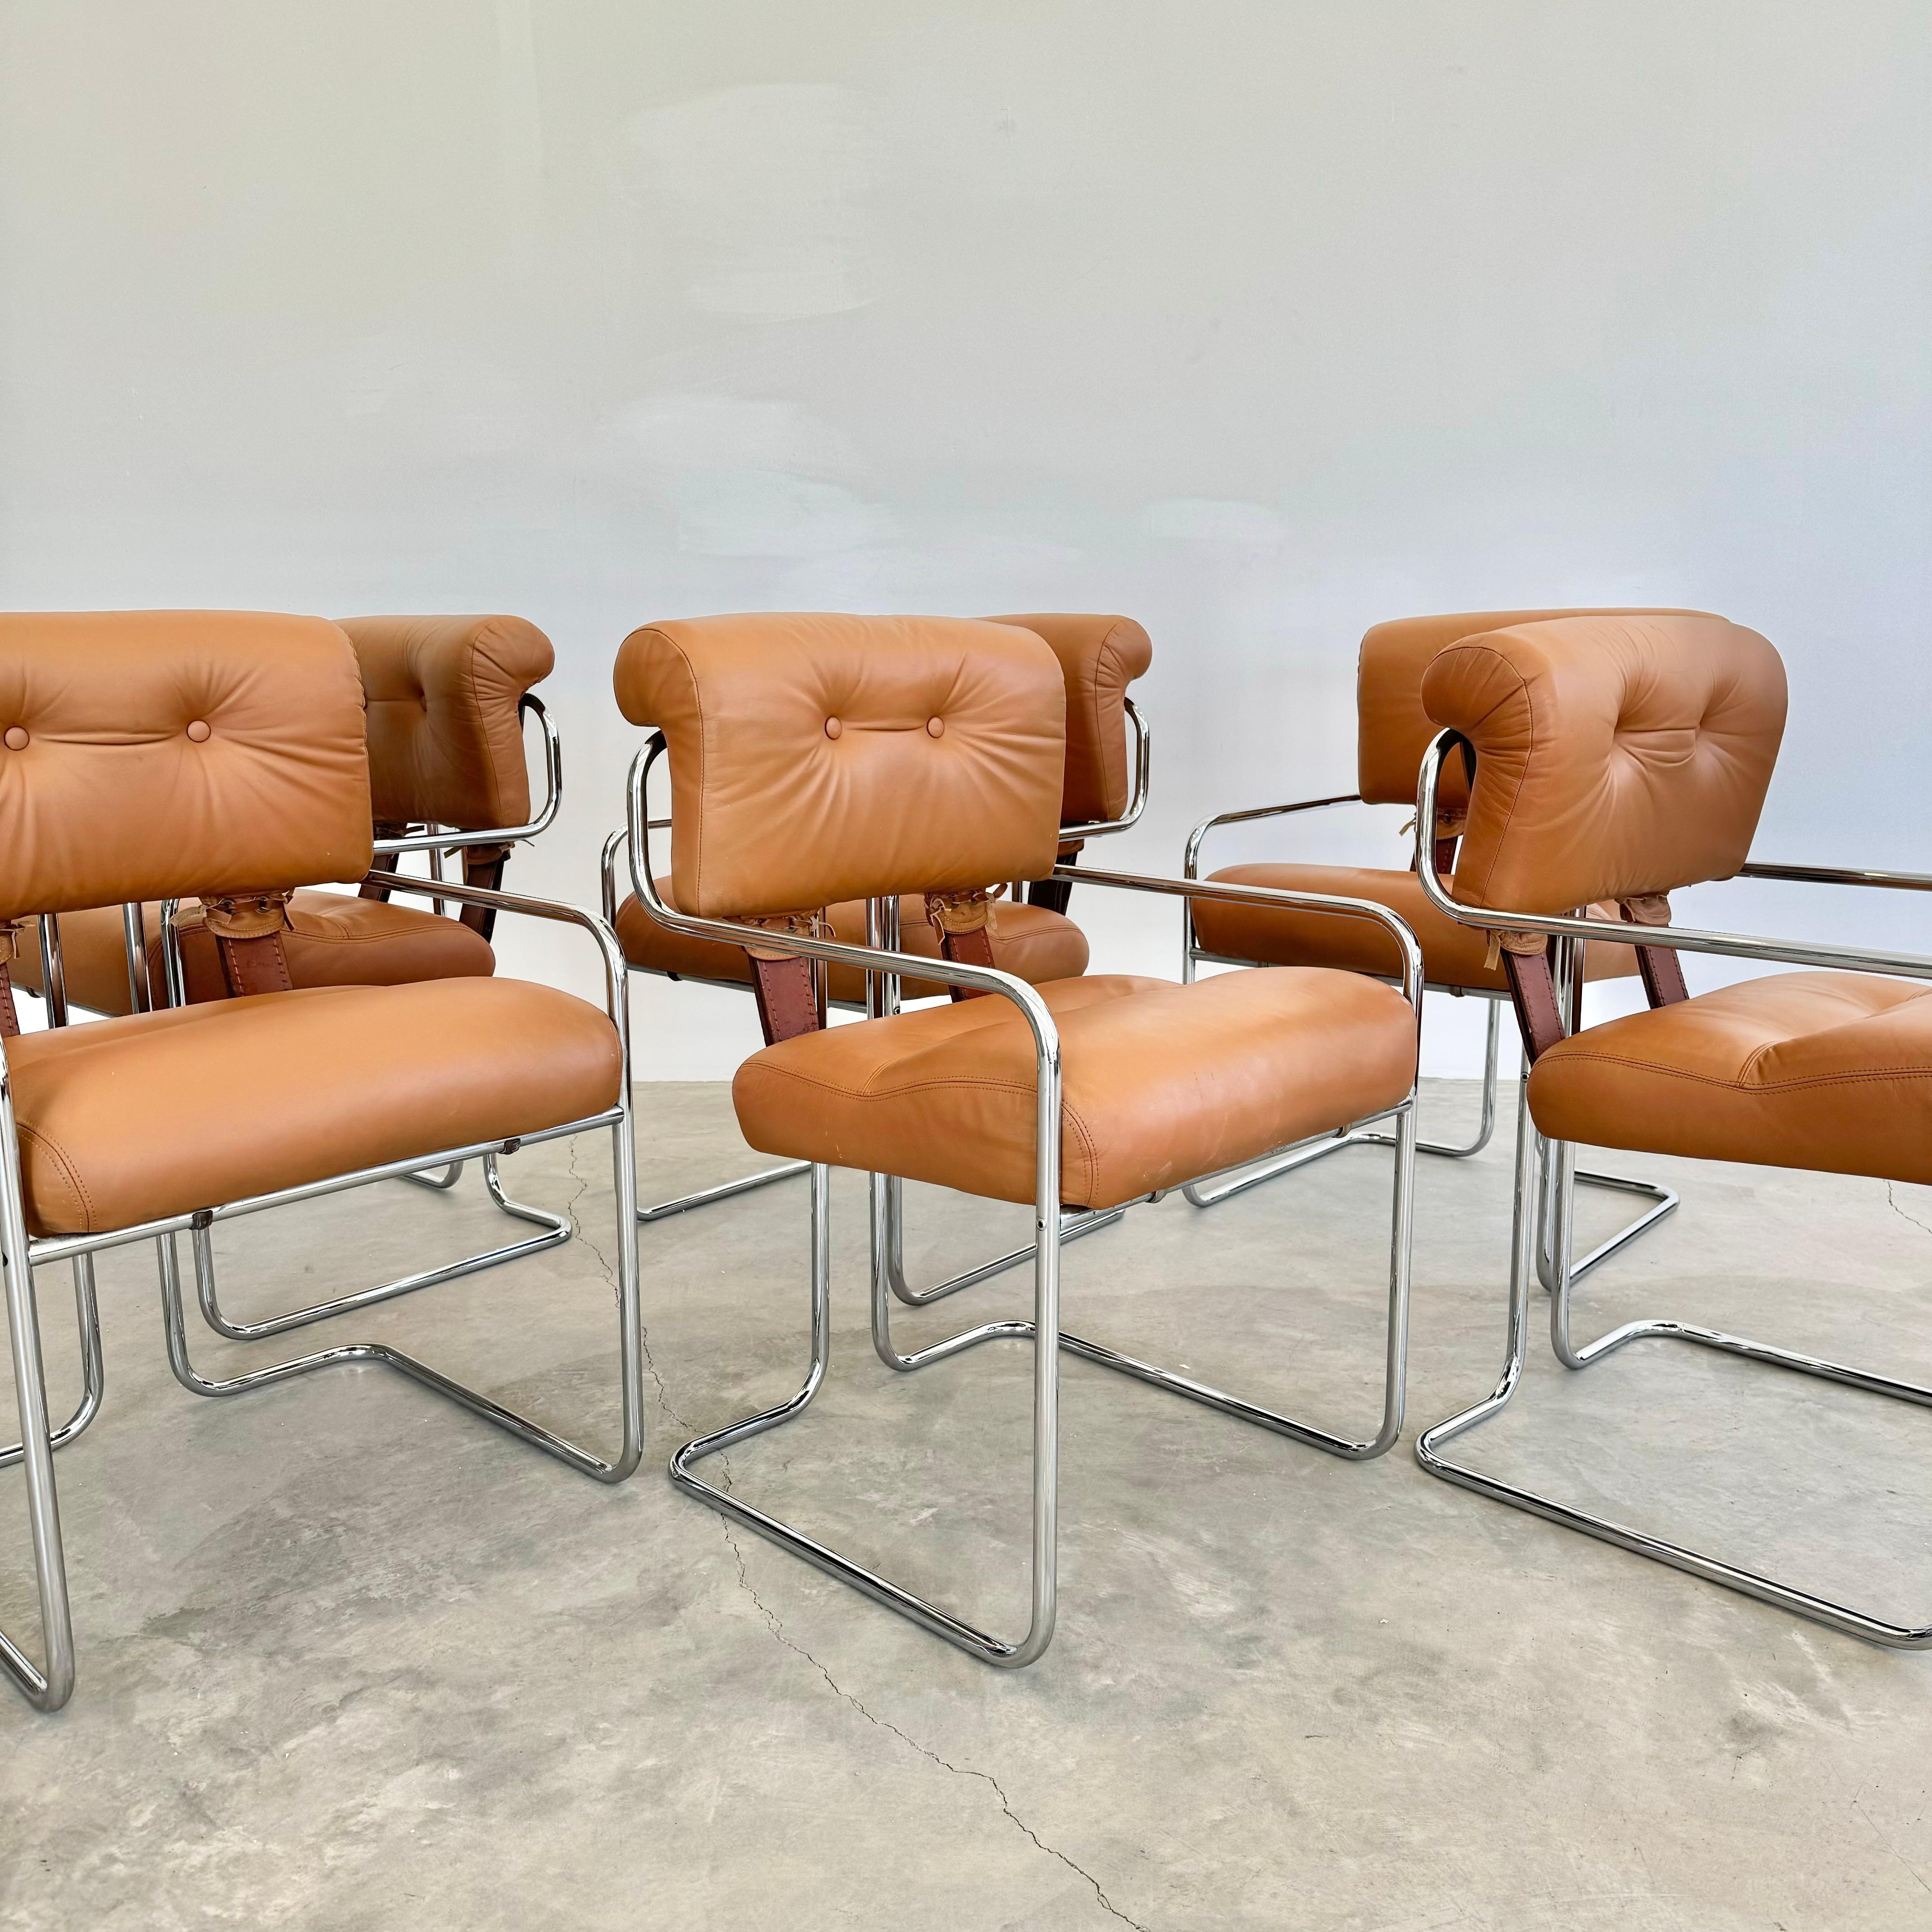 Late 20th Century Set of 6 'Tucroma' Chairs in Tan by Guido Faleschini, 1970s Italy For Sale